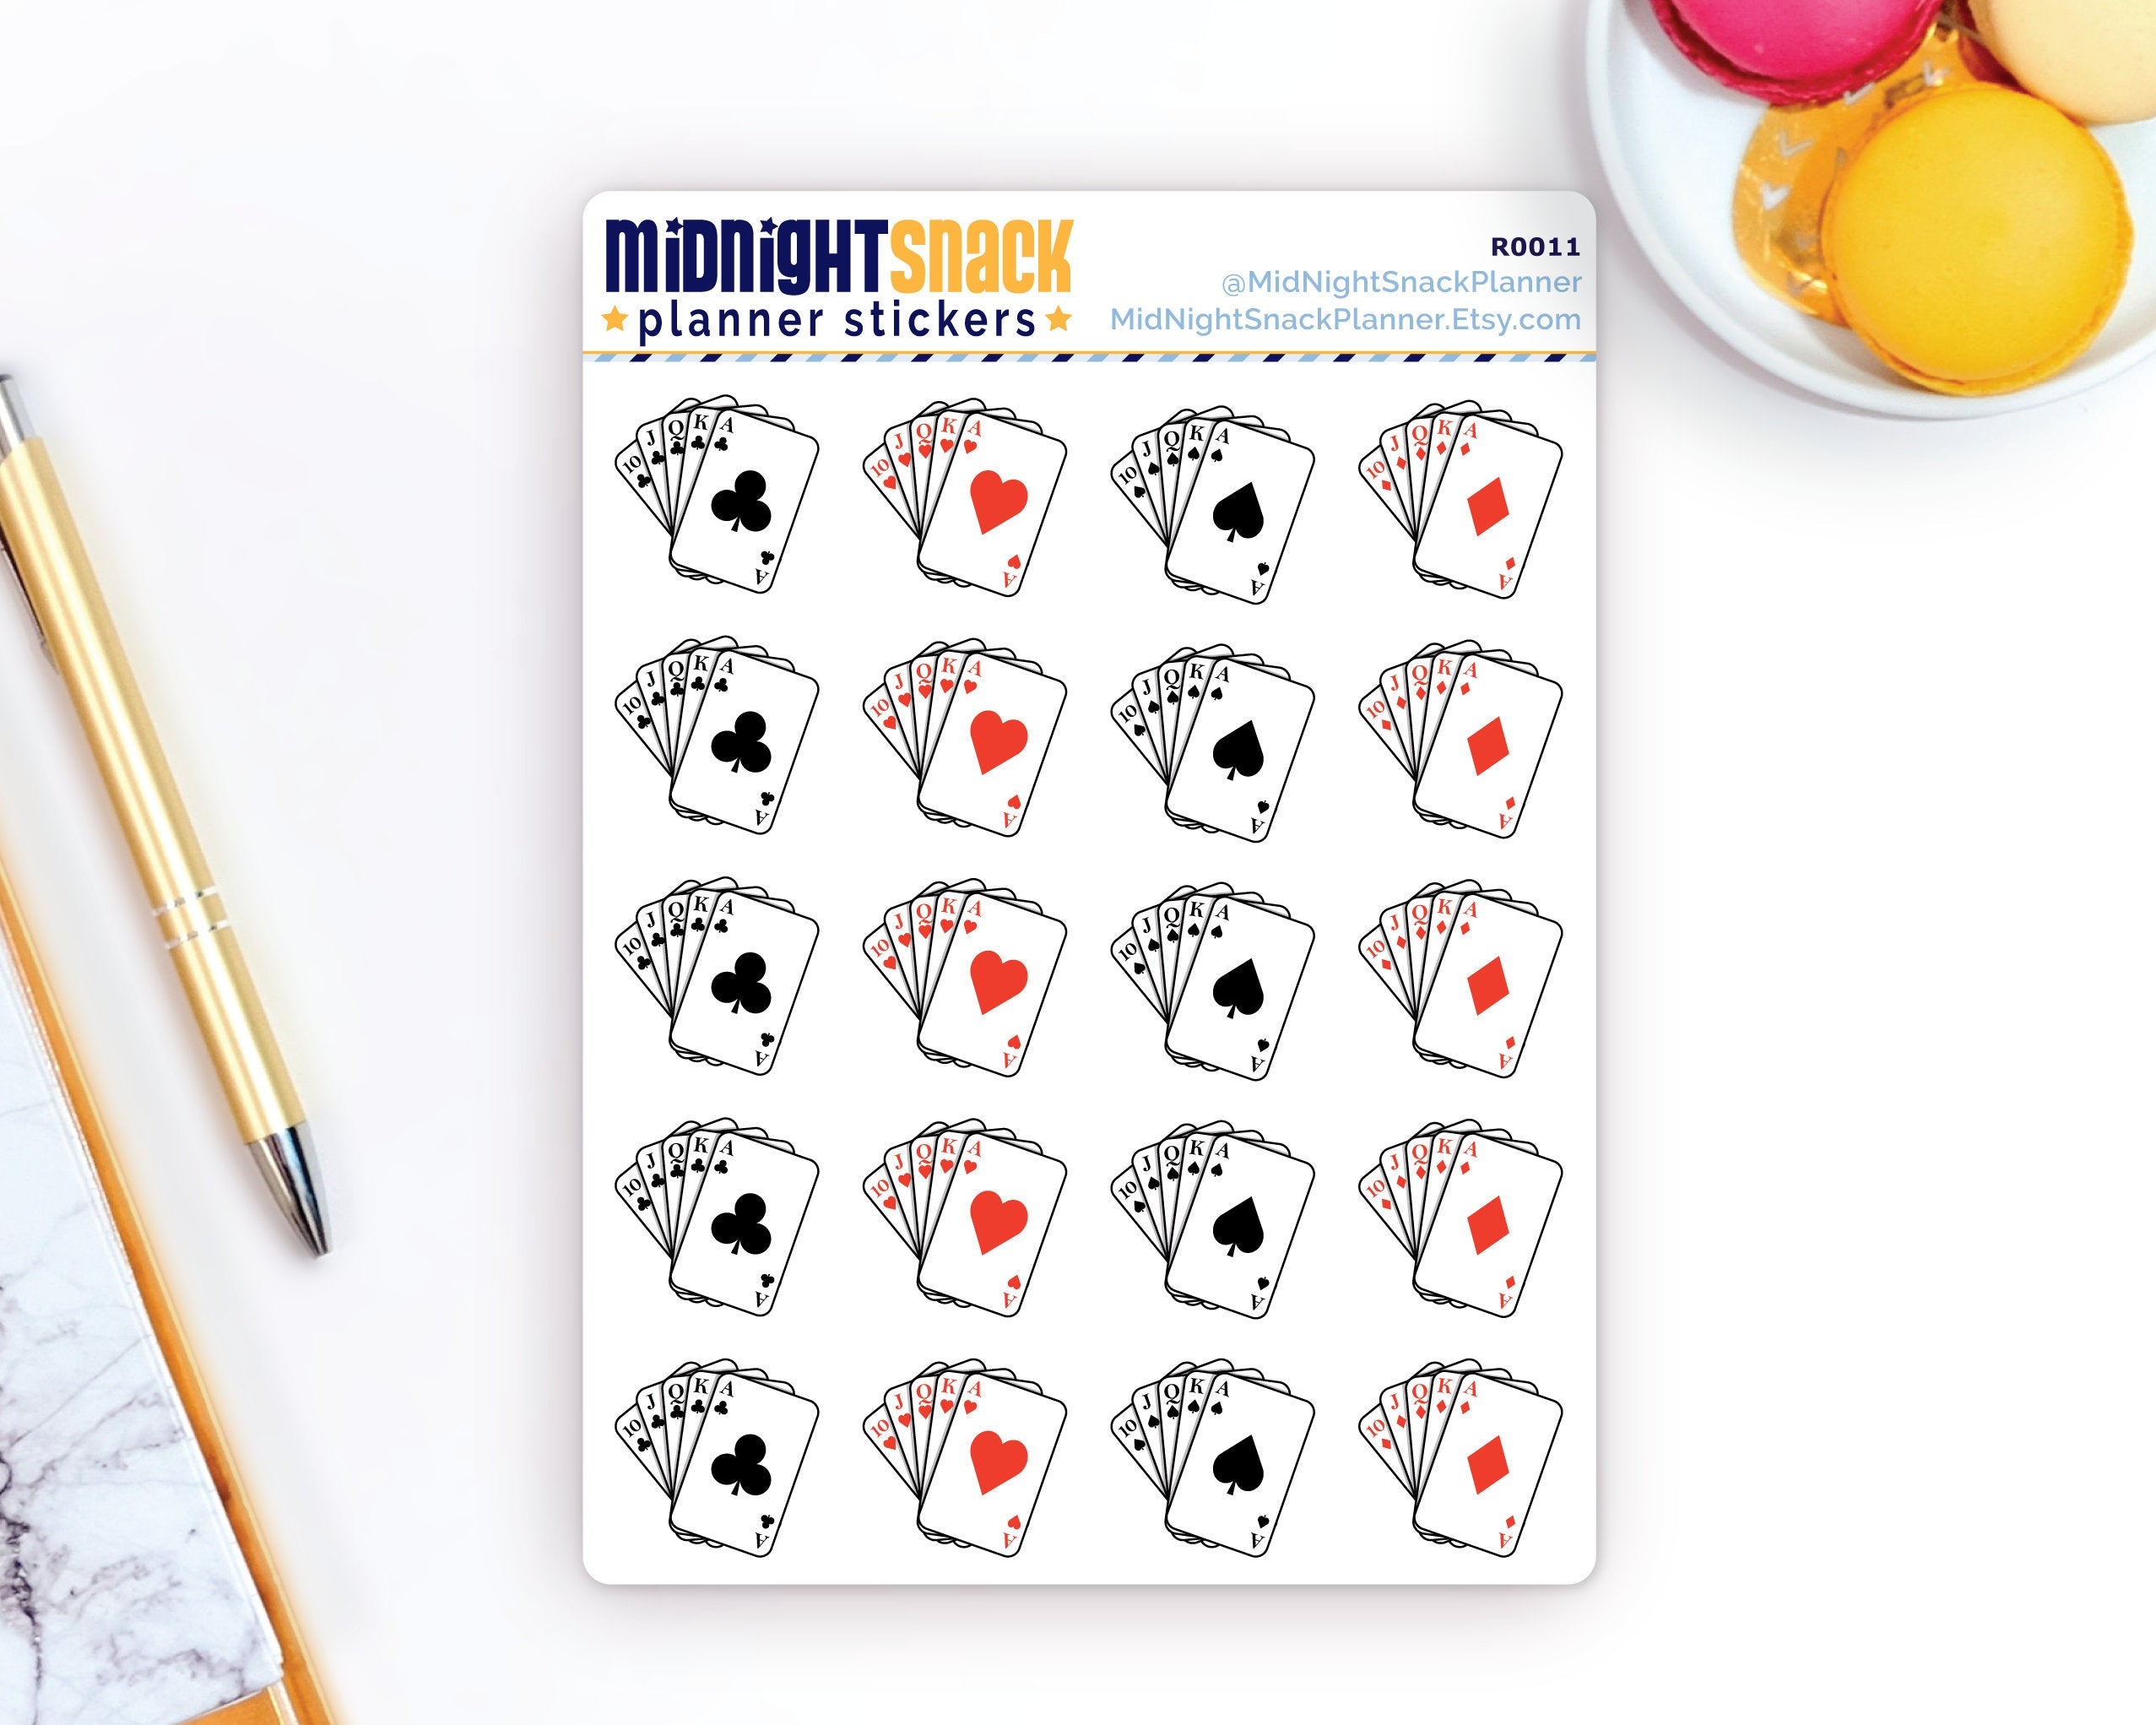 Card Game Icon: Fun and Games Planner Stickers Midnight Snack Planner